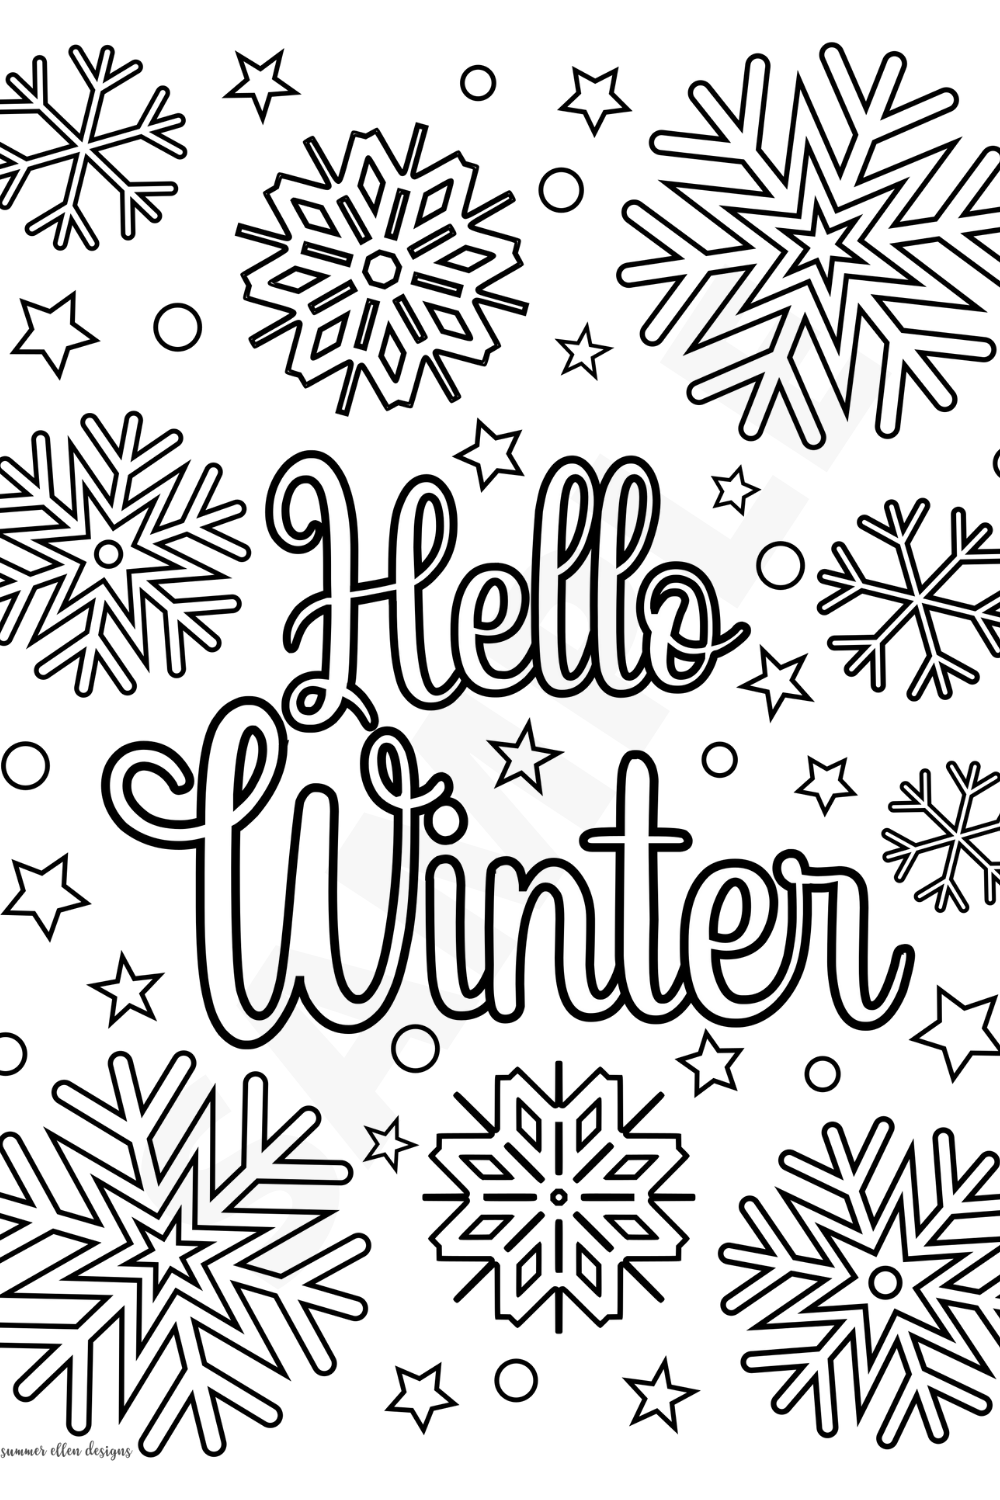 Hello winter snowflake coloring page winter holiday activities xmas family fun adult and kids coloring page pdf instant download